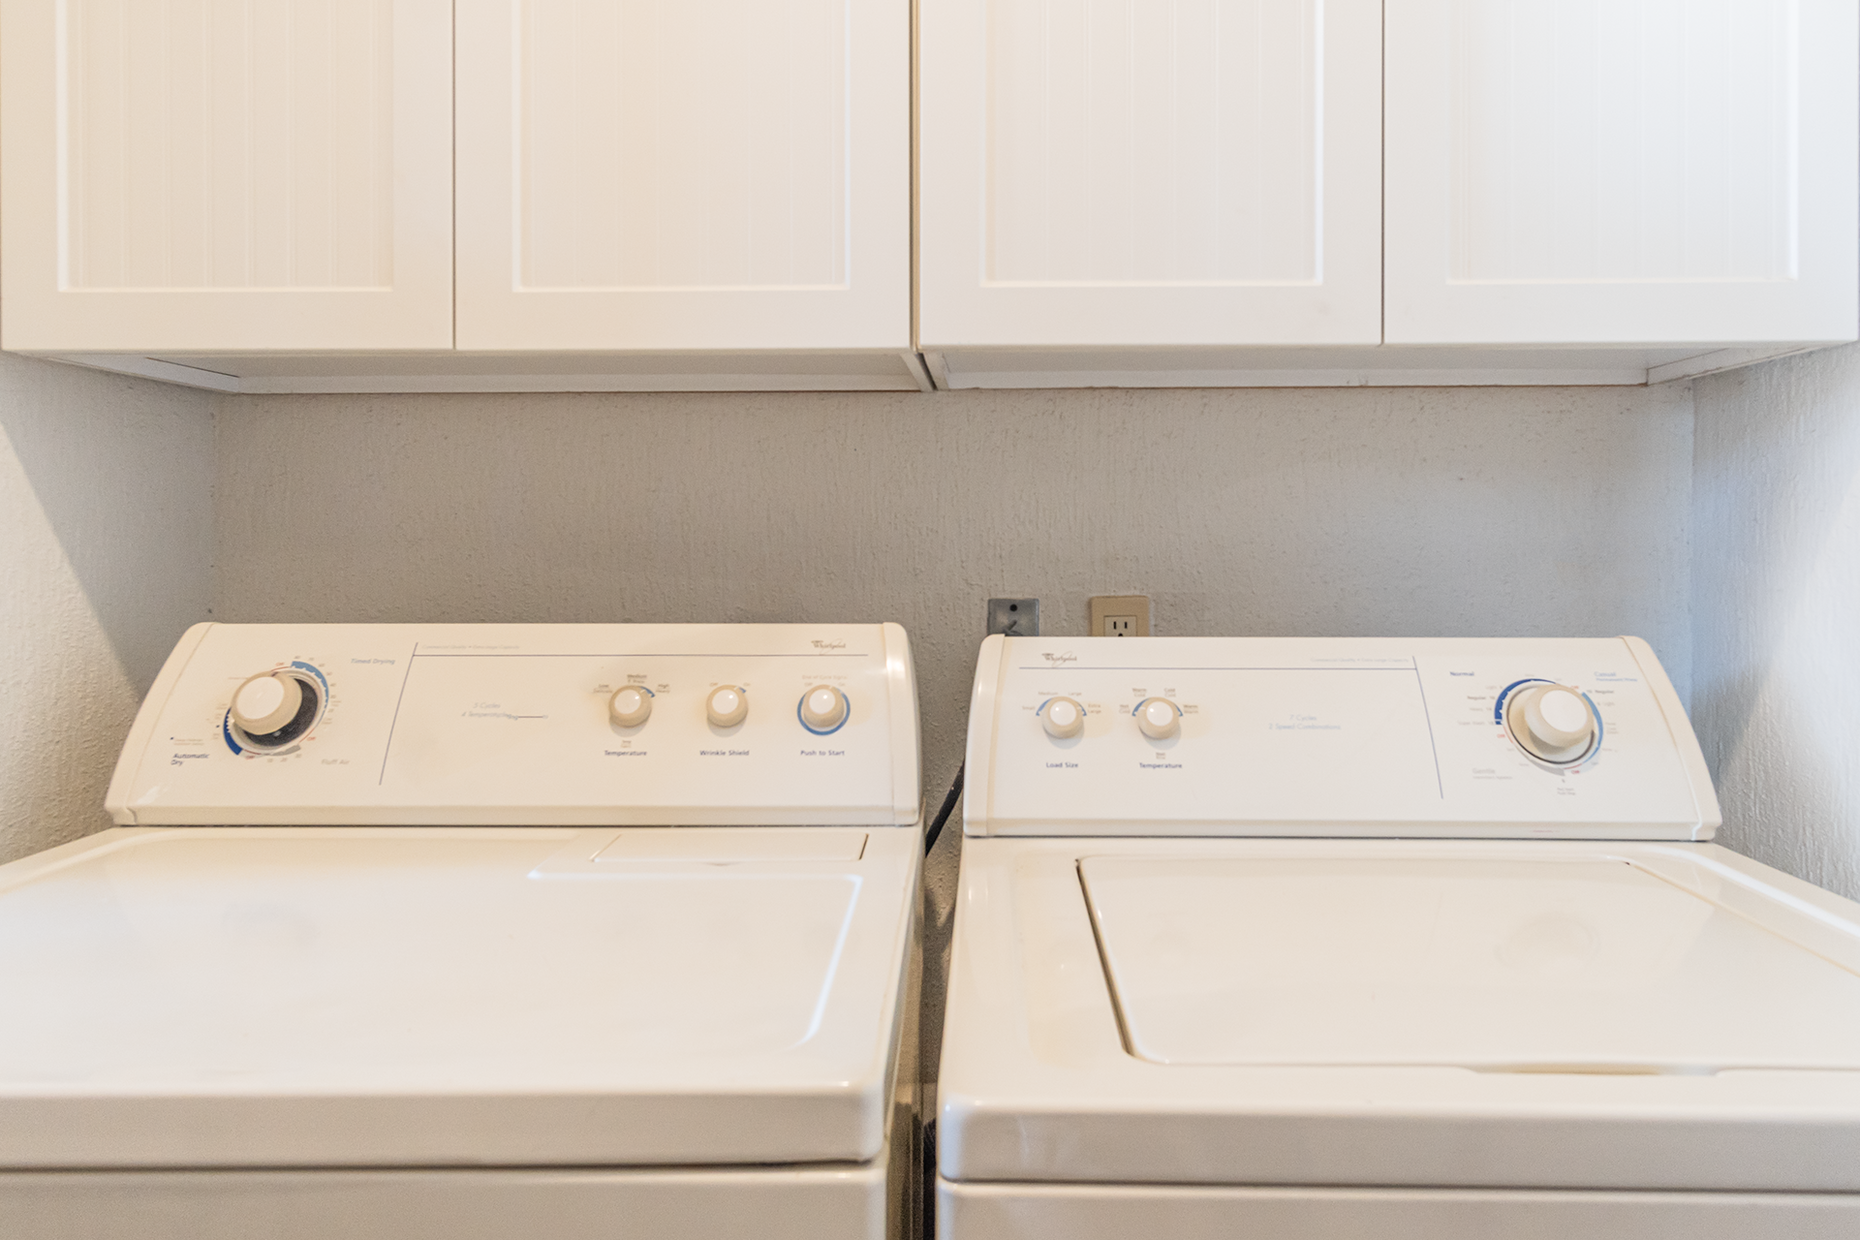 Washer and dryer in utility room